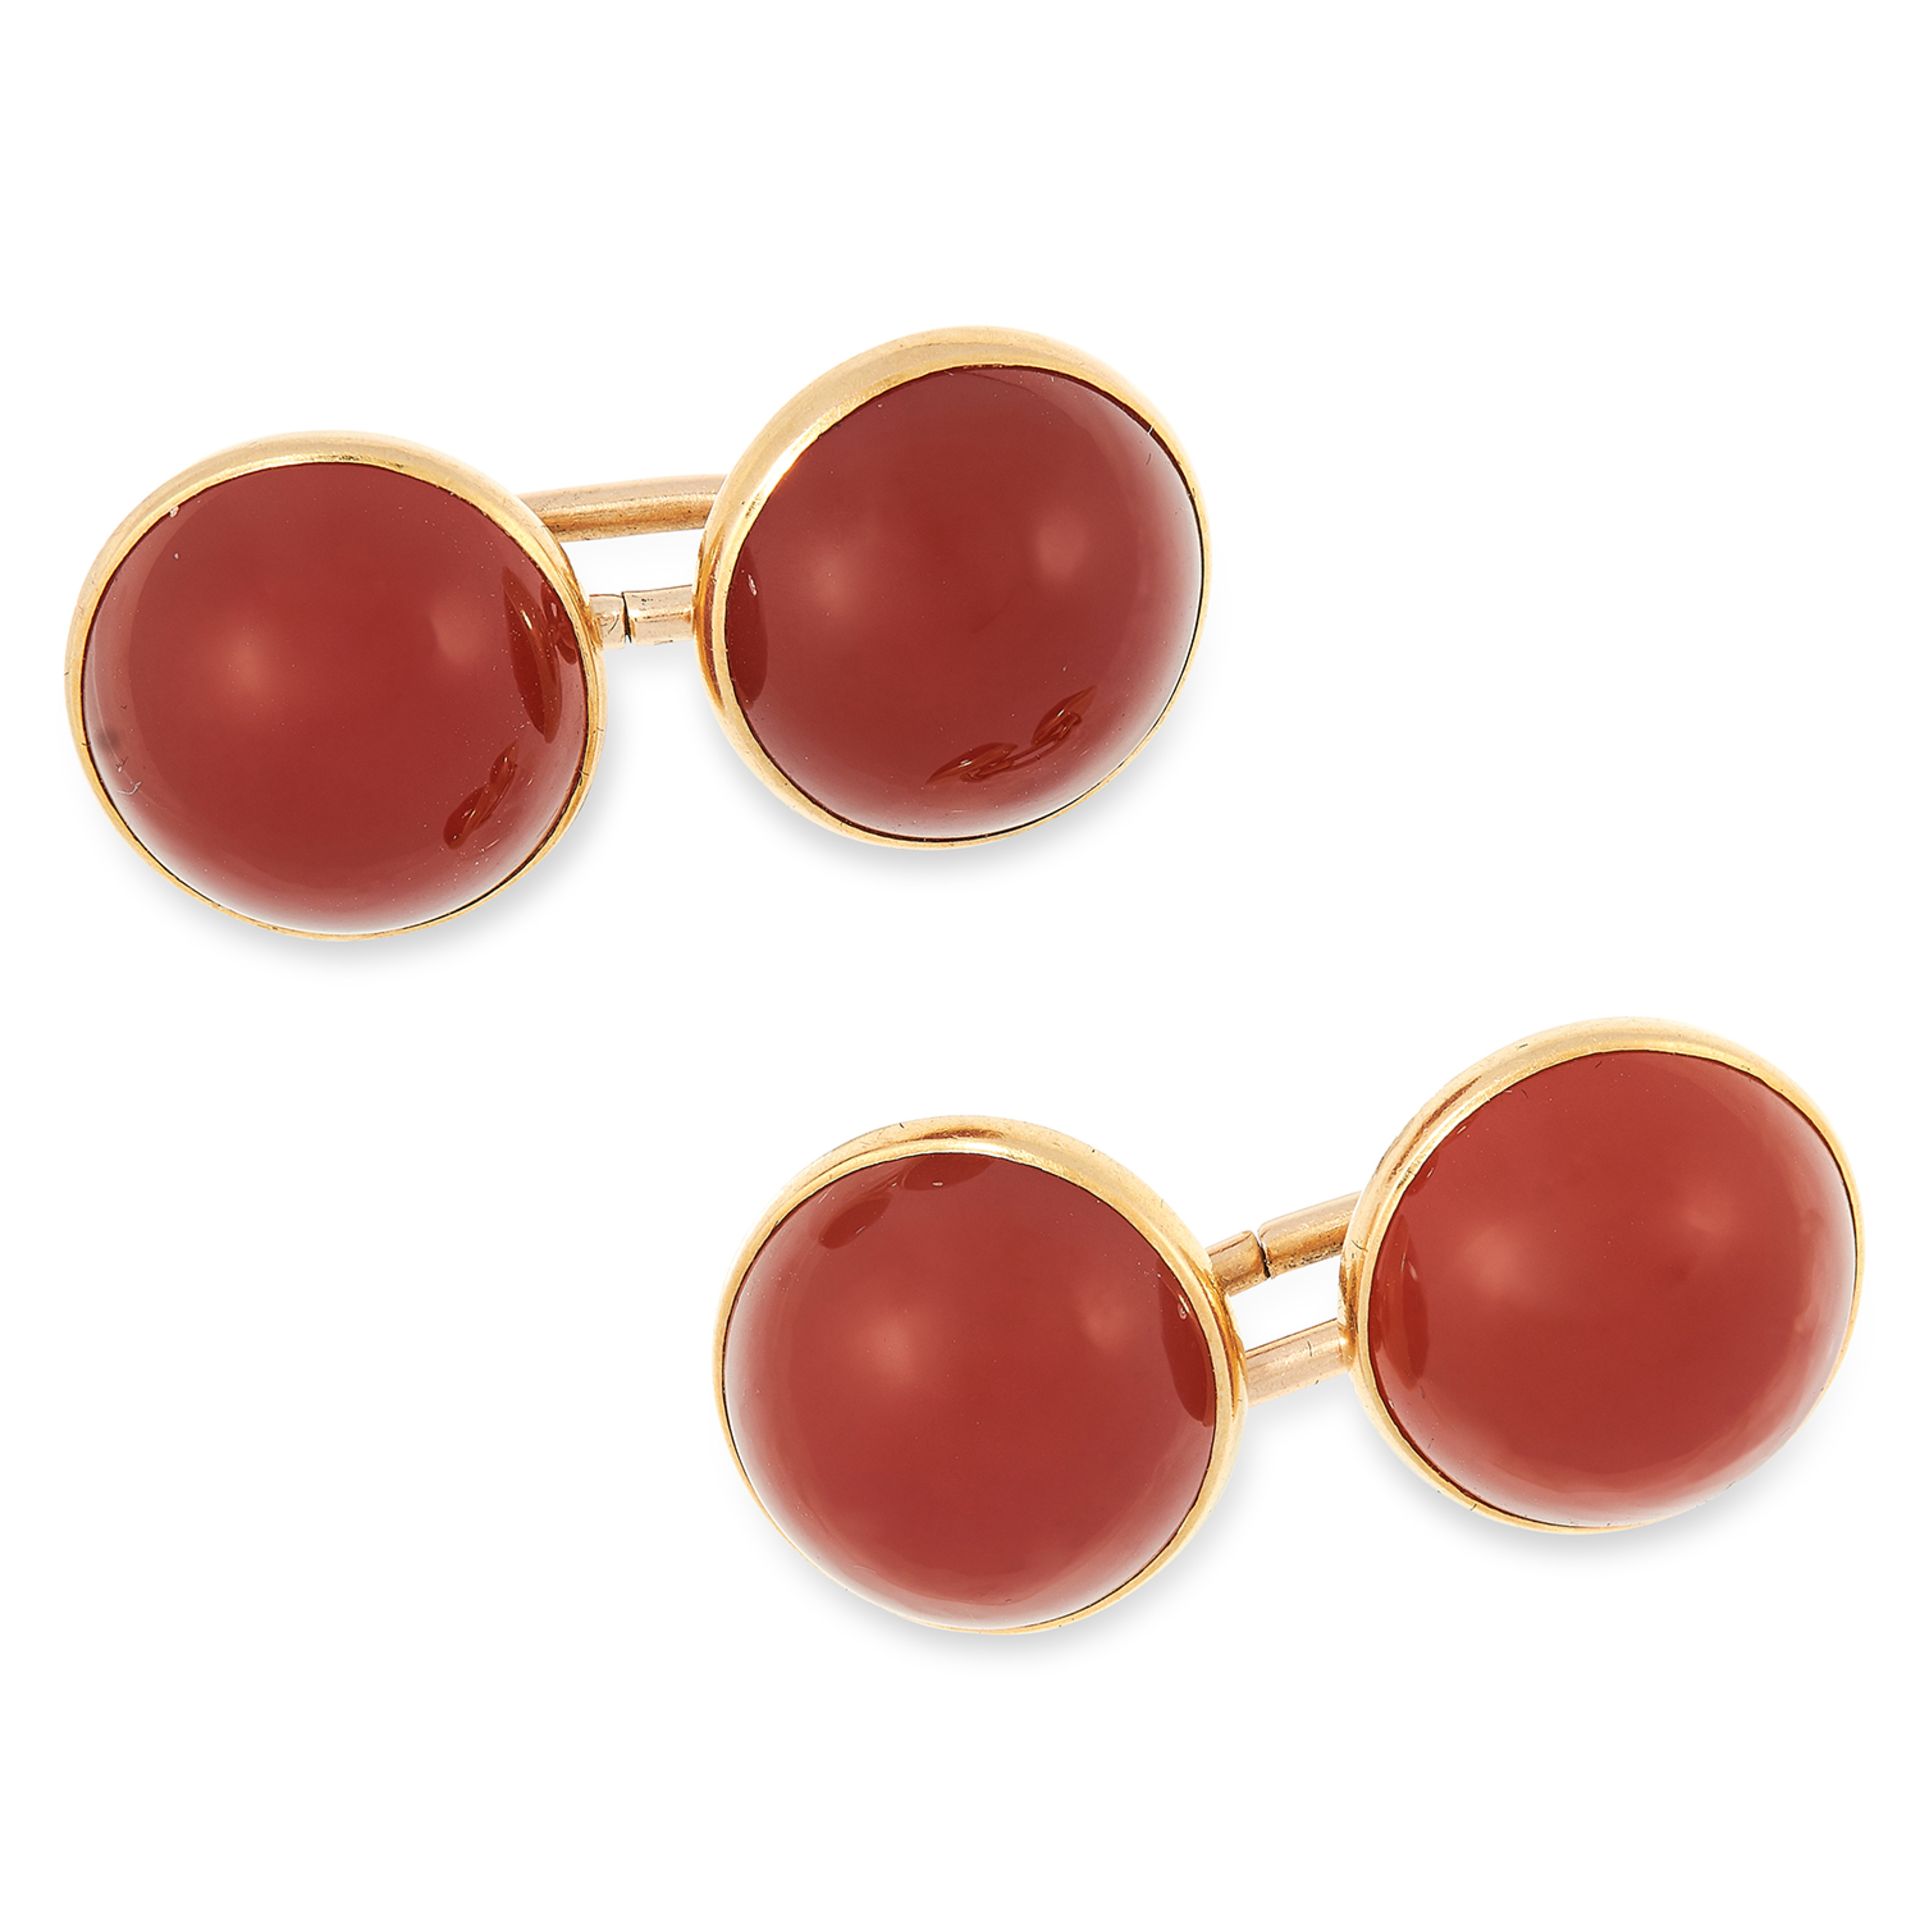 A PAIR OF ANTIQUE CARNELIAN CUFFLINKS each set with two carnelian cabochons, marked for 10ct